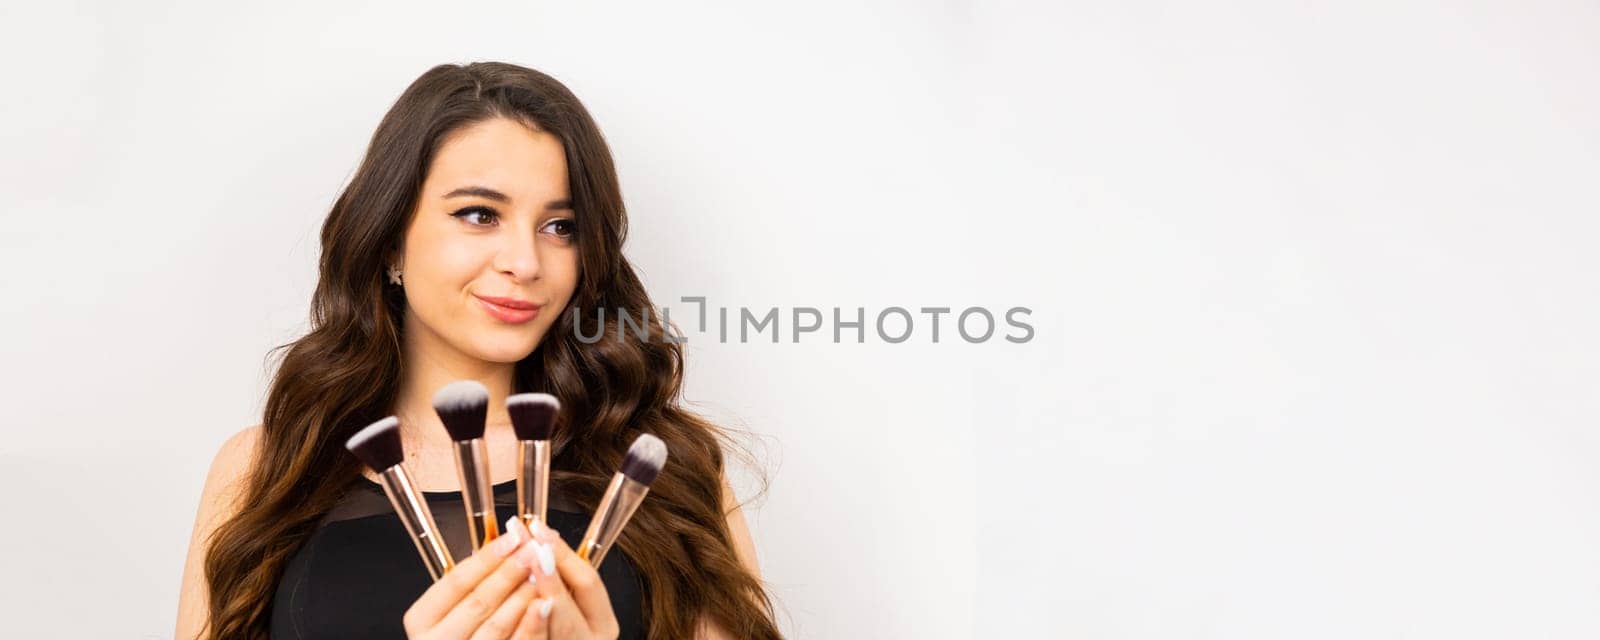 Beautiful woman with makeup brushes on the white background with copy space.